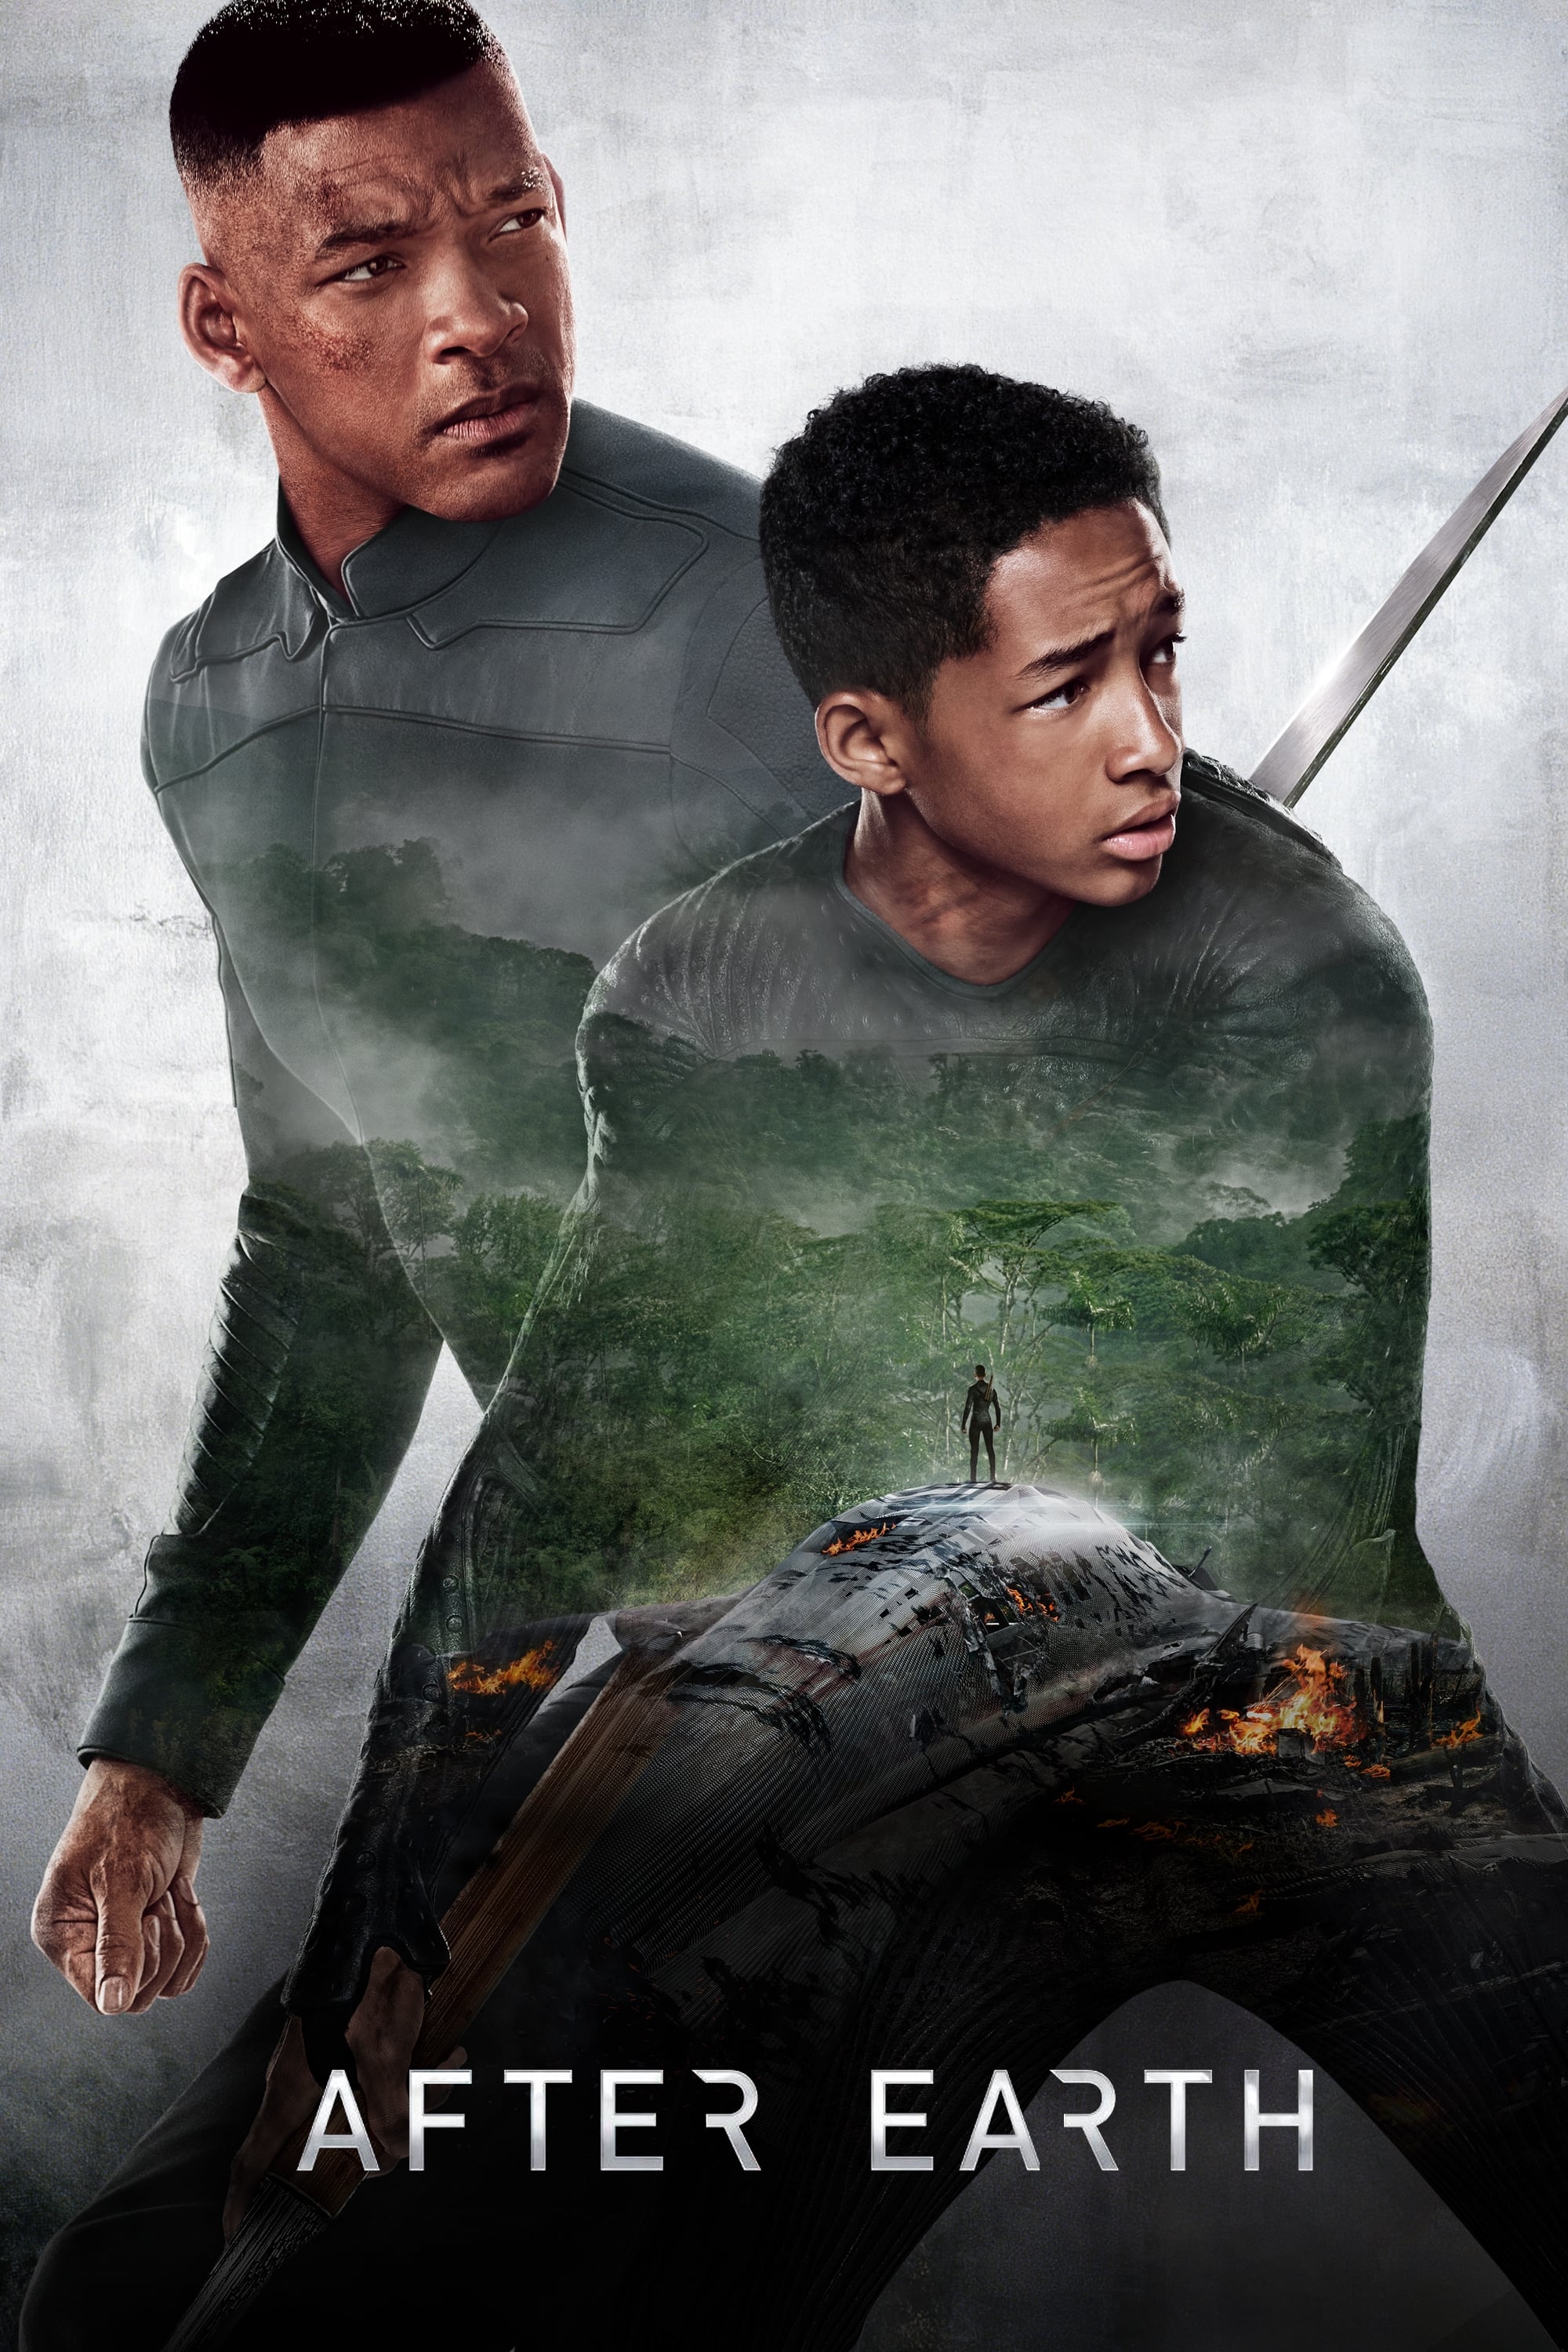 after earth full movie in hindi download kickass torrent